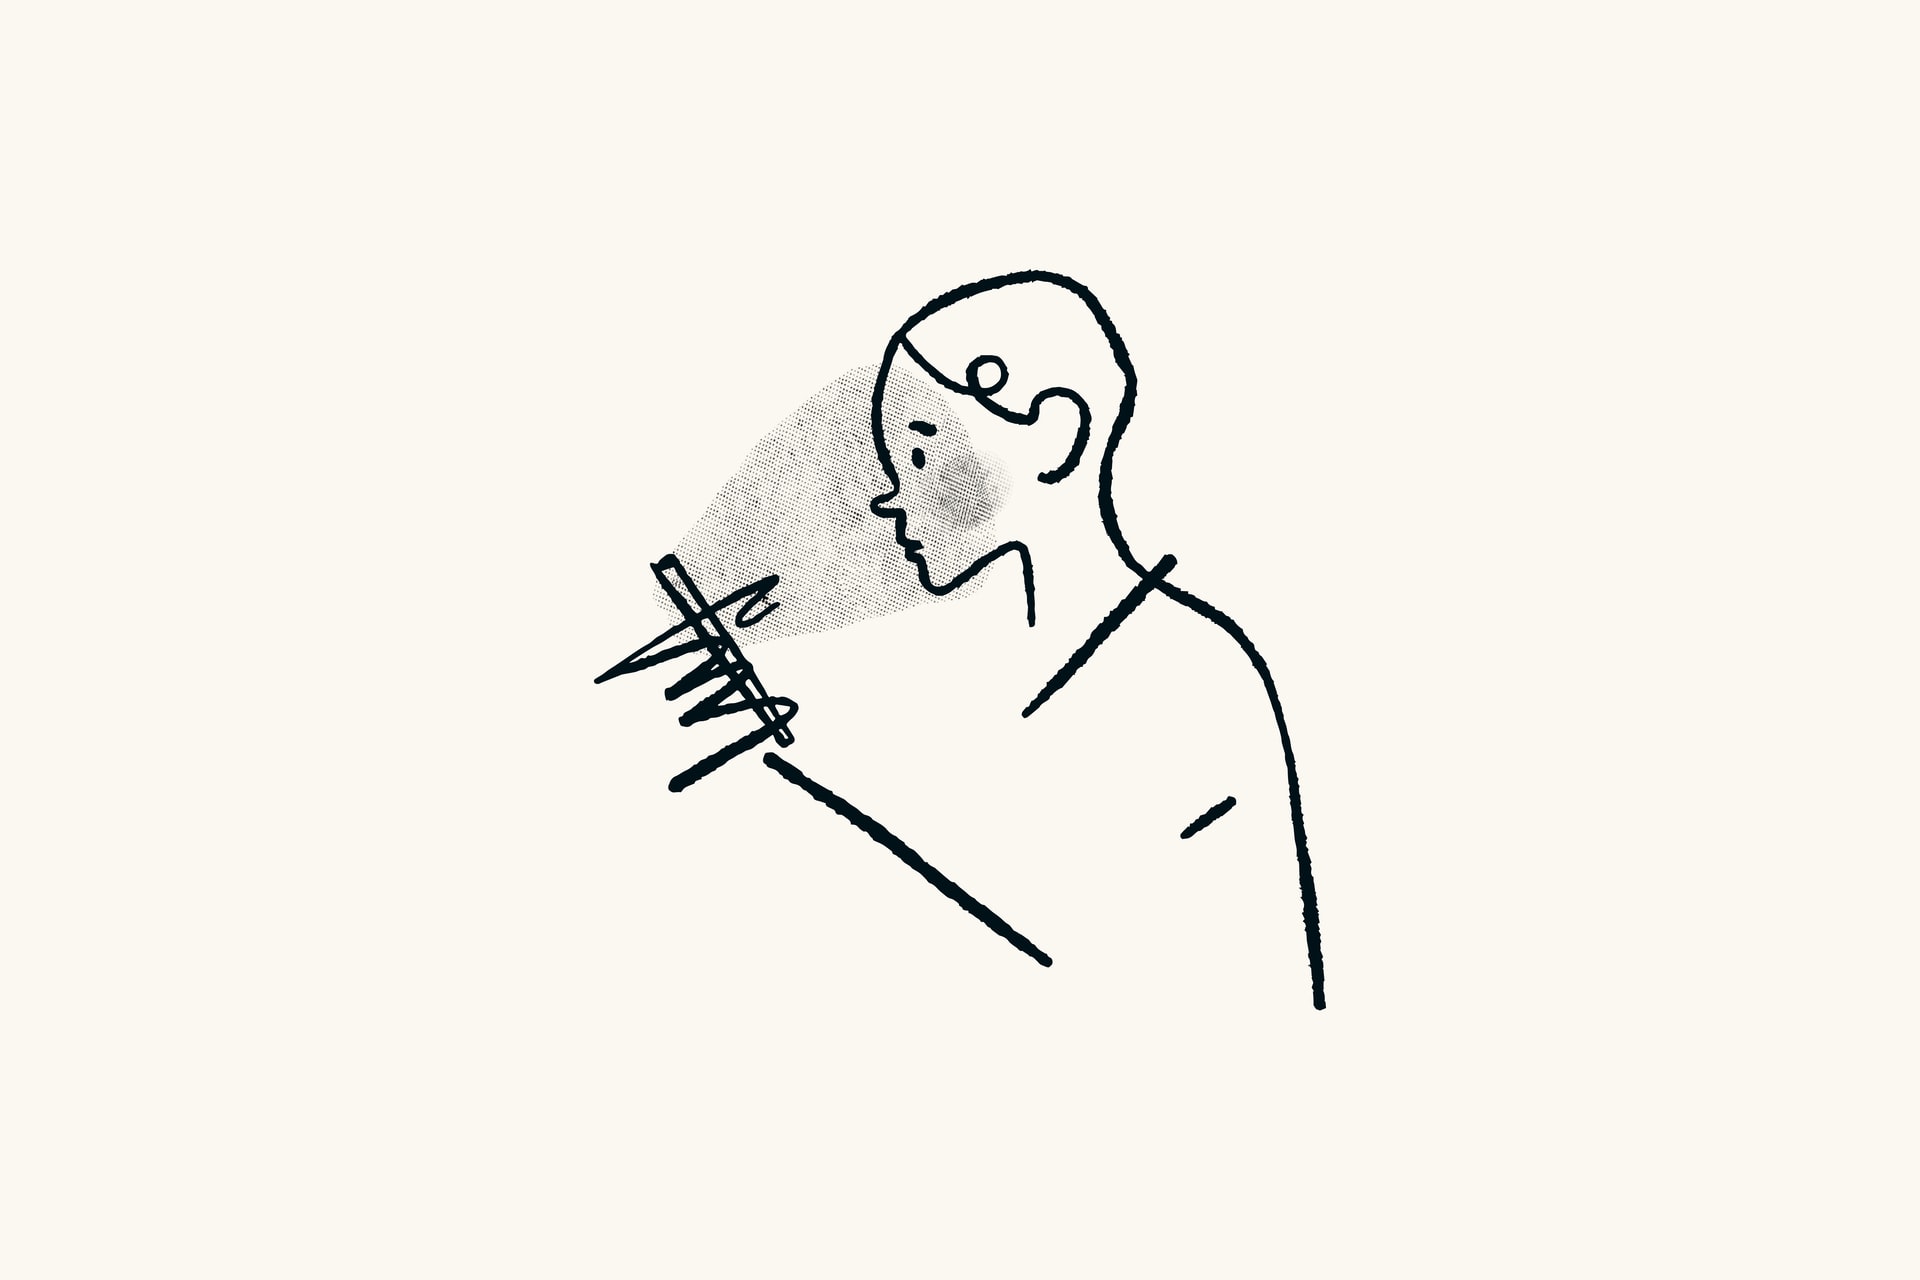 Illustration of a person browsing on their phone.